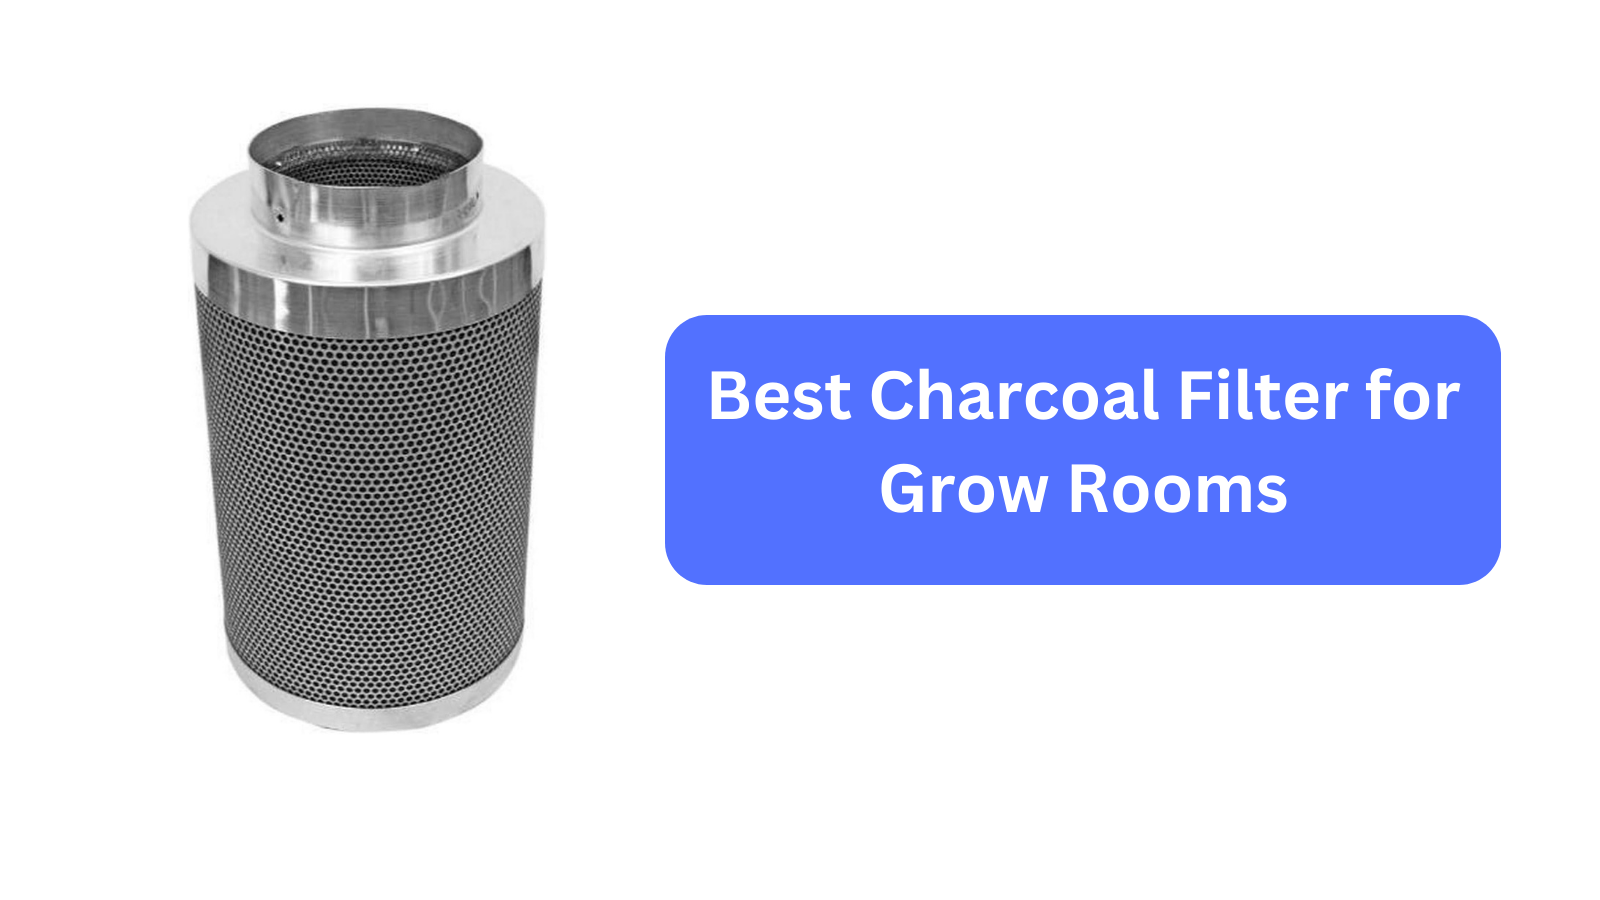 Best 5 Charcoal Filters for Grow Rooms: A Buyer’s Guide